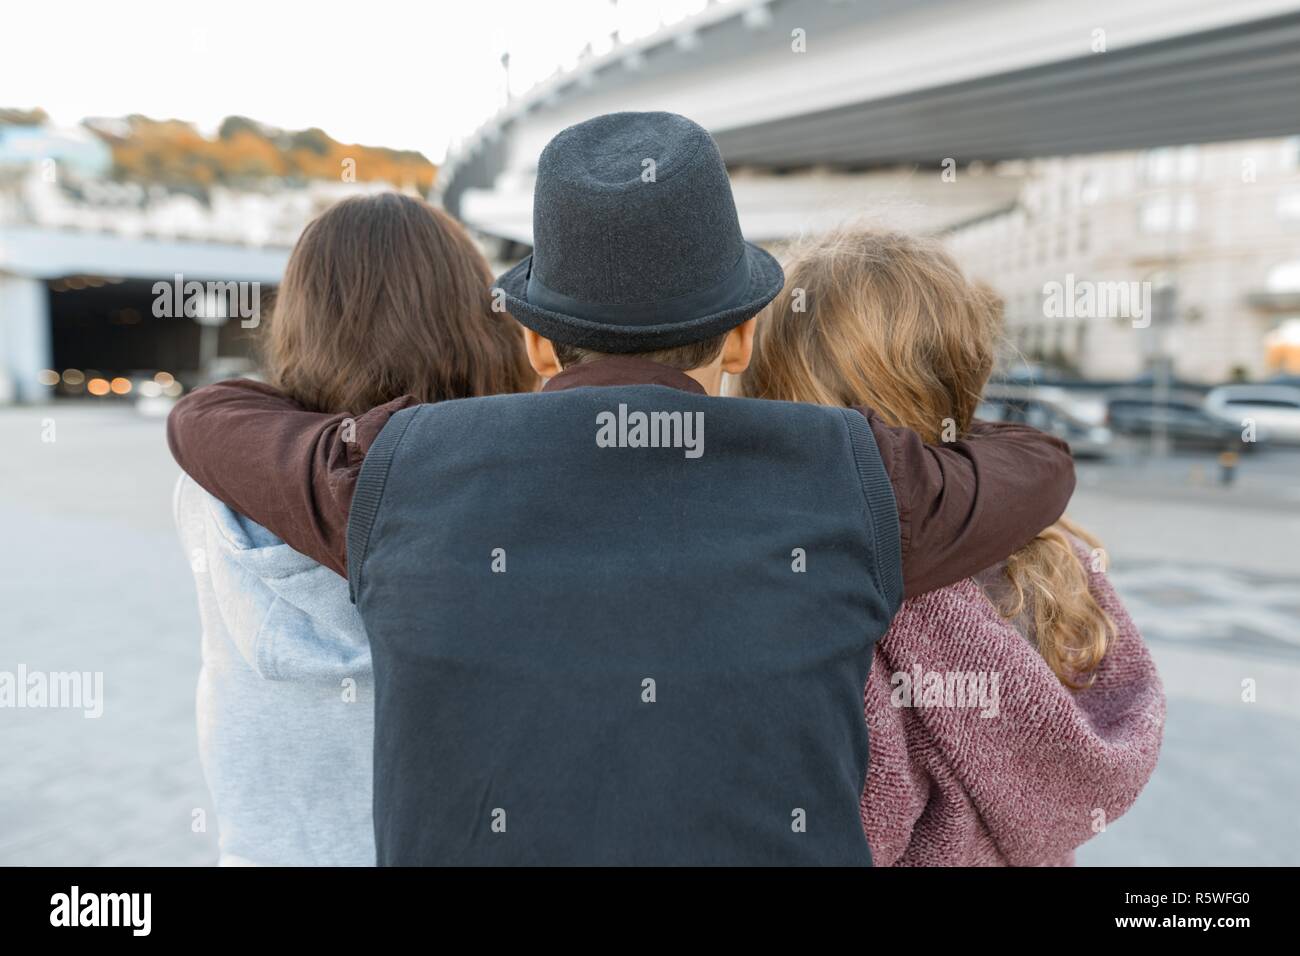 Three friends, view from the back of young teenager boy hugging two girls by the shoulders. Children look ahead, city life Stock Photo